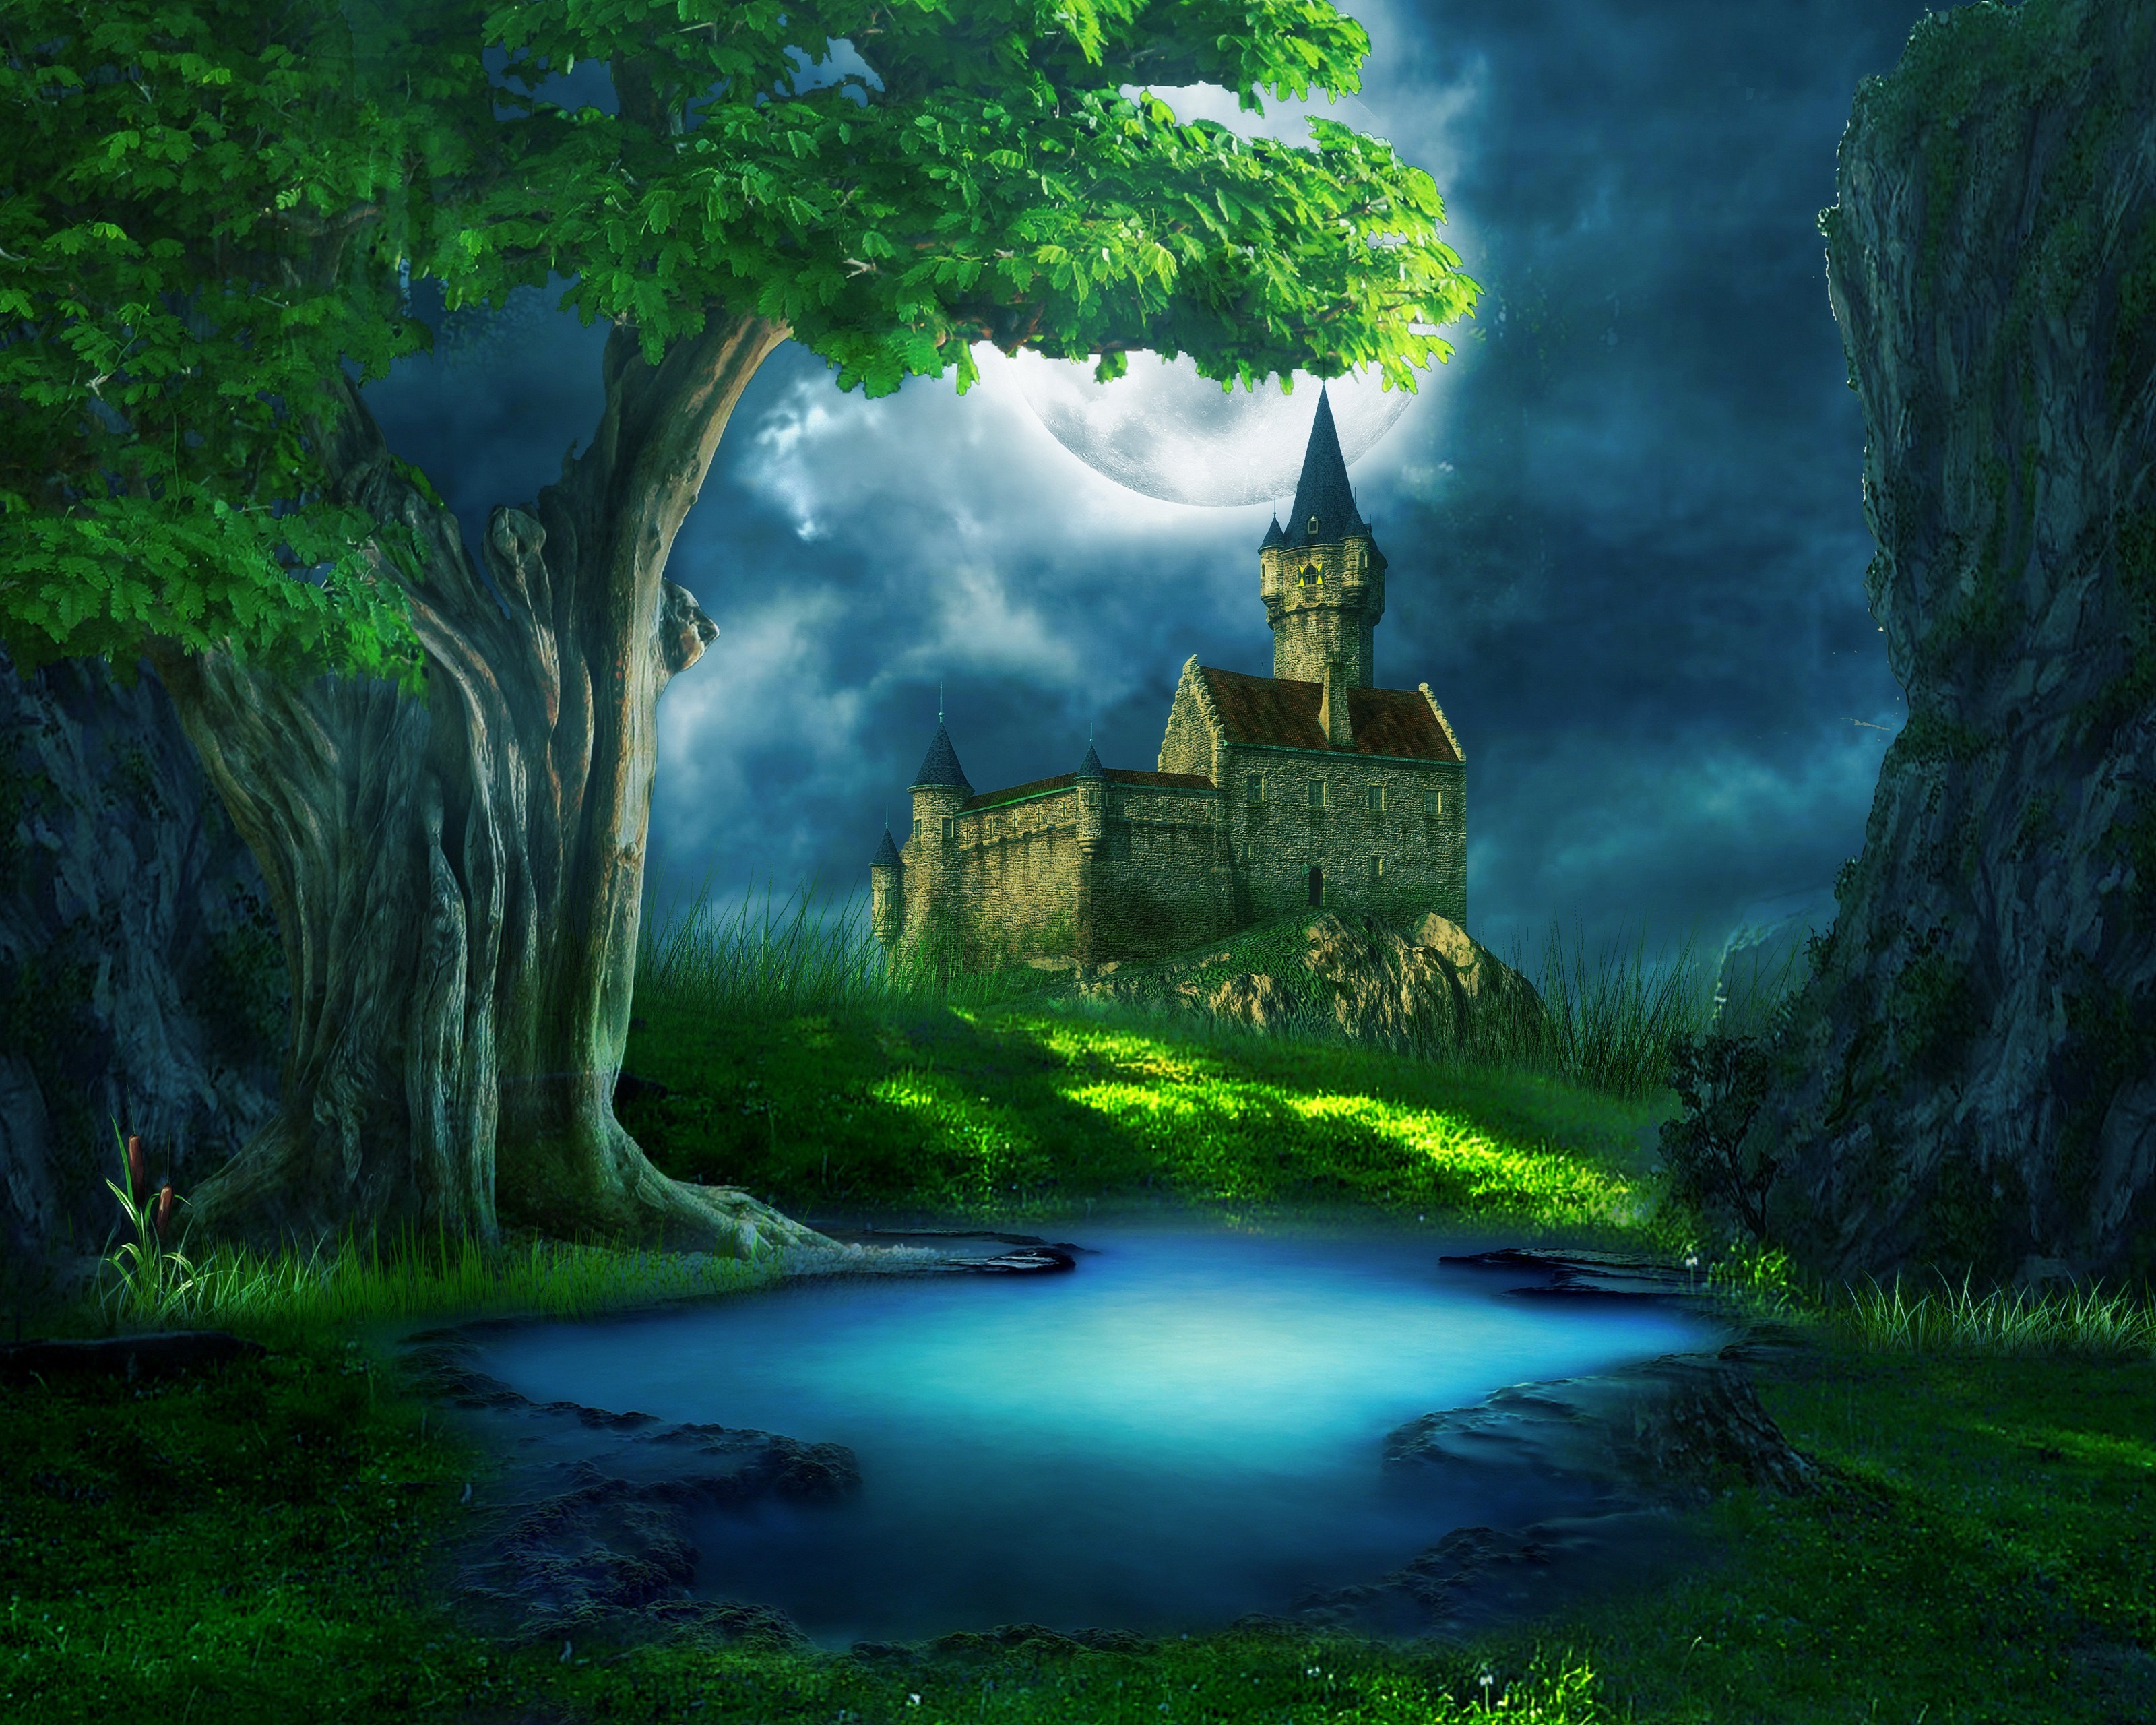 Castle in Enchanted Forest by ANDREA SURAJBALLY